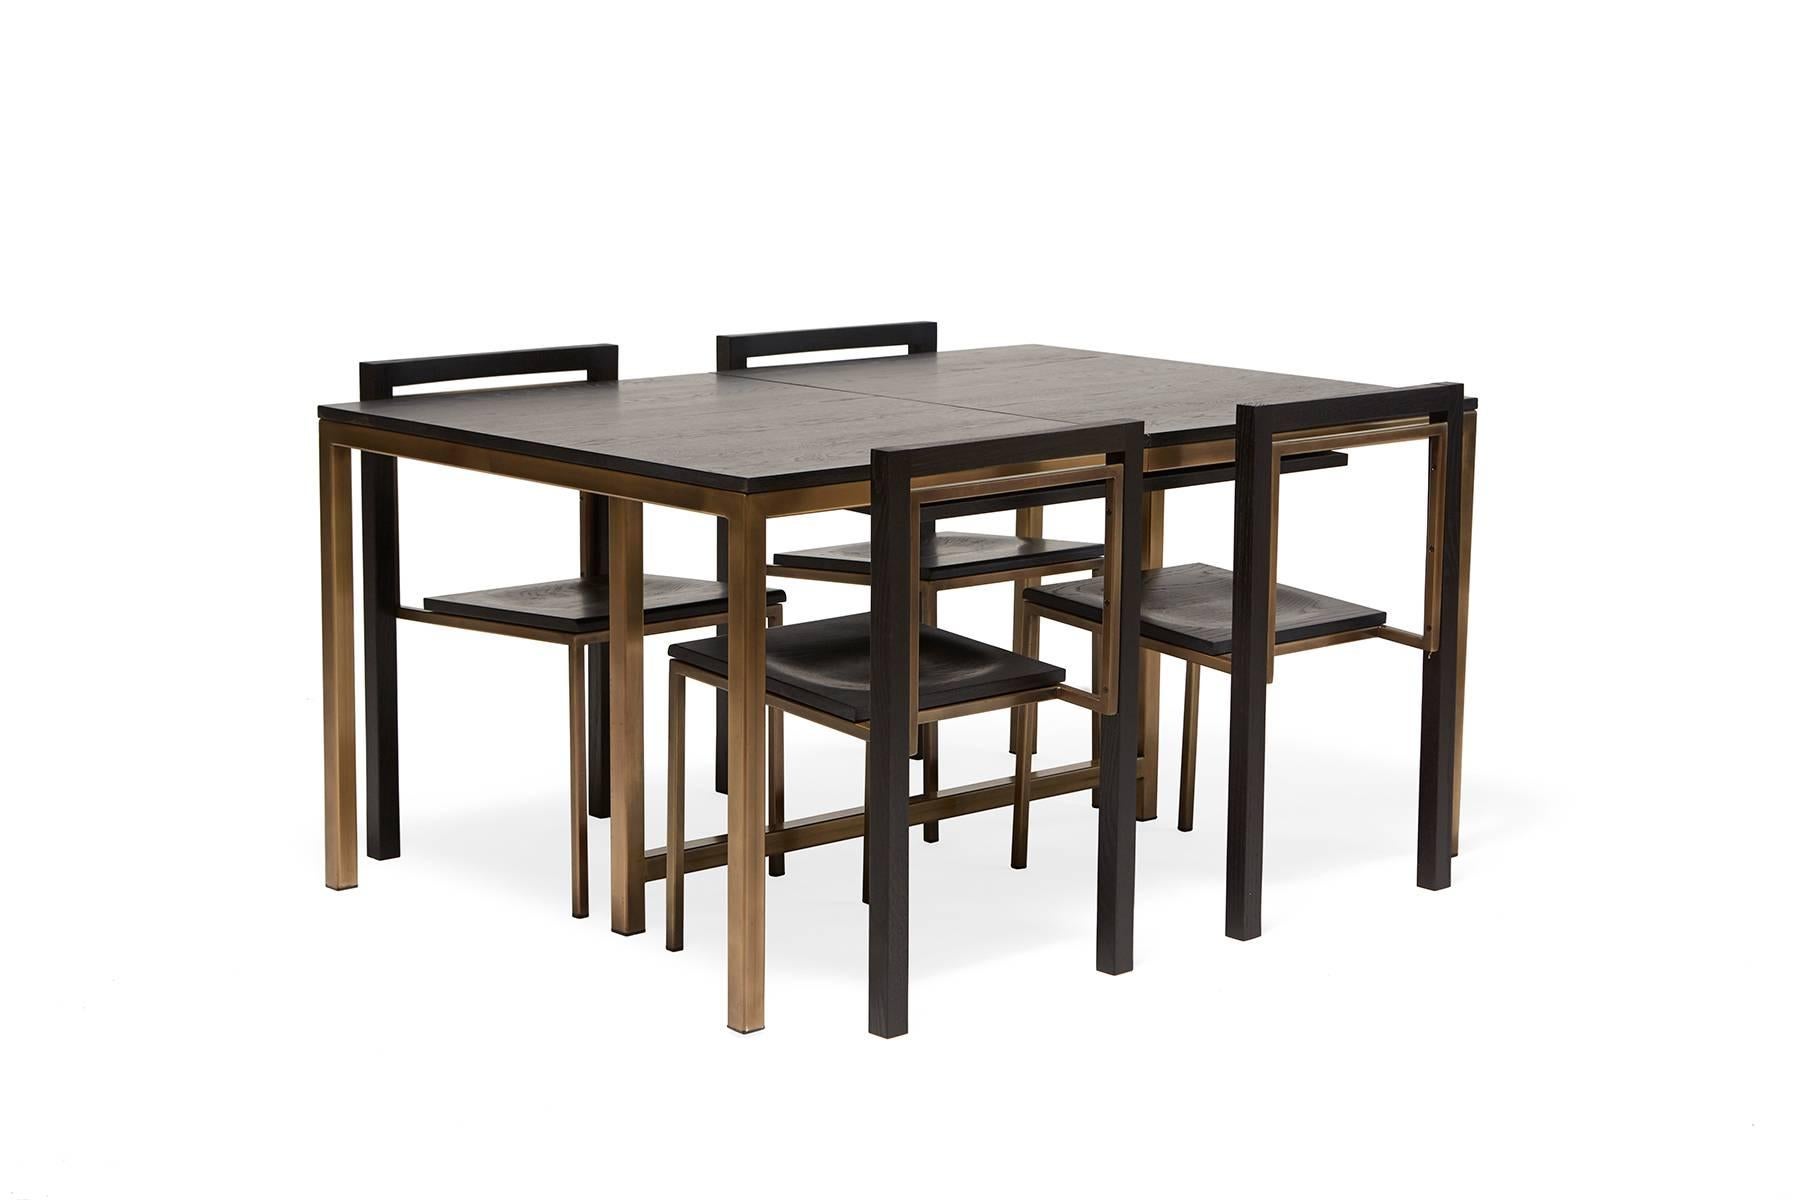 American Ebonized Oak and Antique Brass Expandable Dining Table